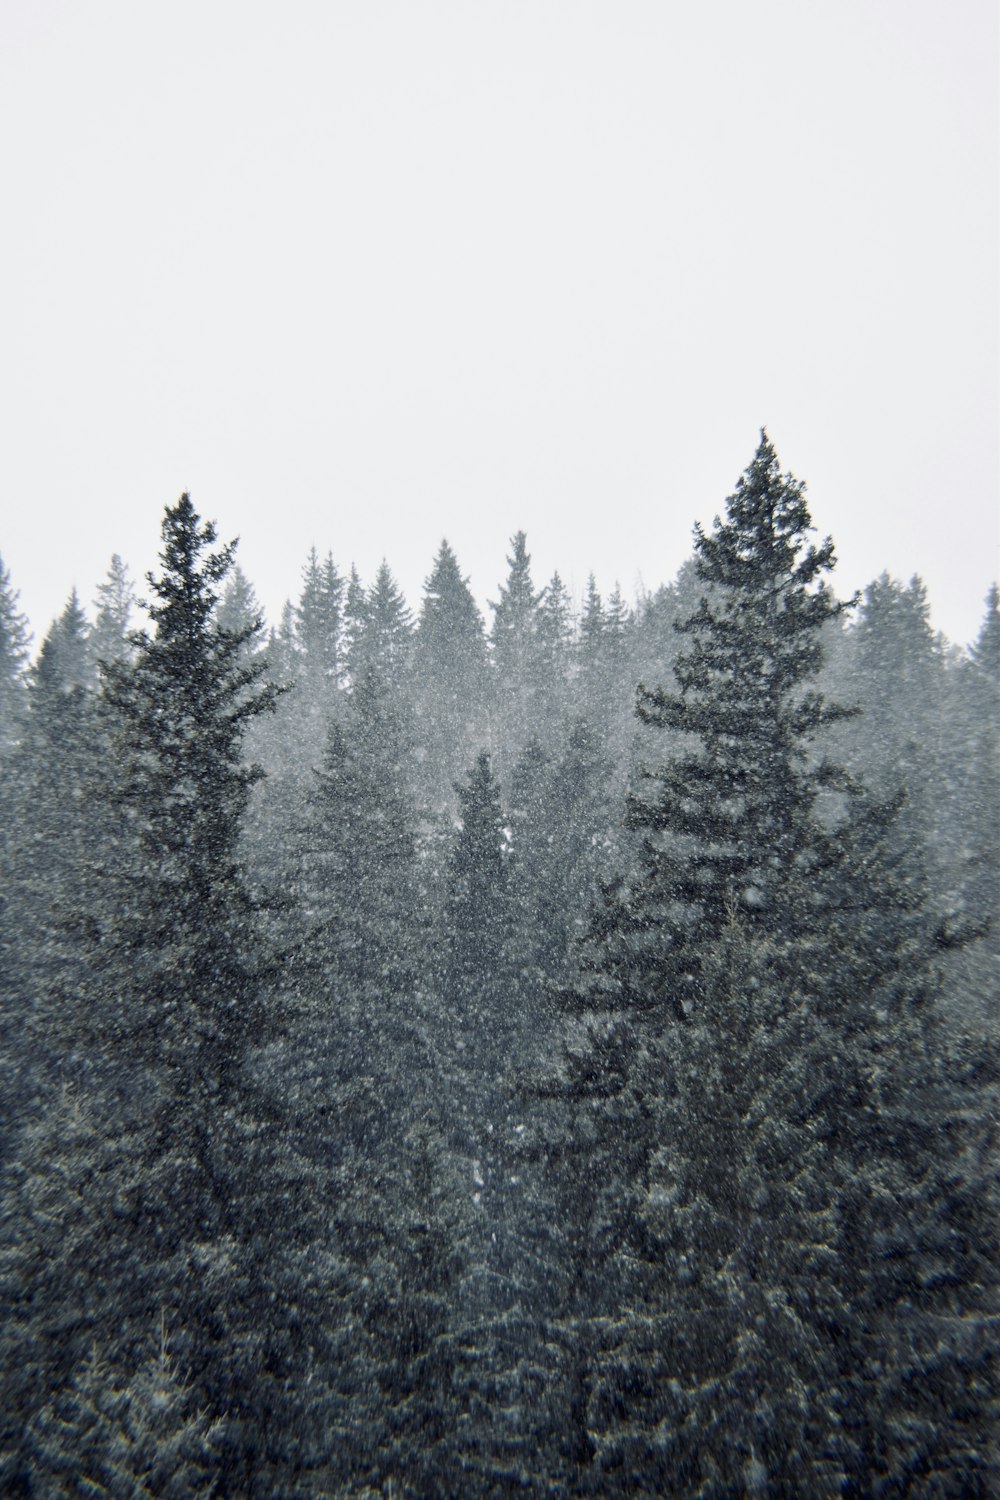 green pine trees covered with snow